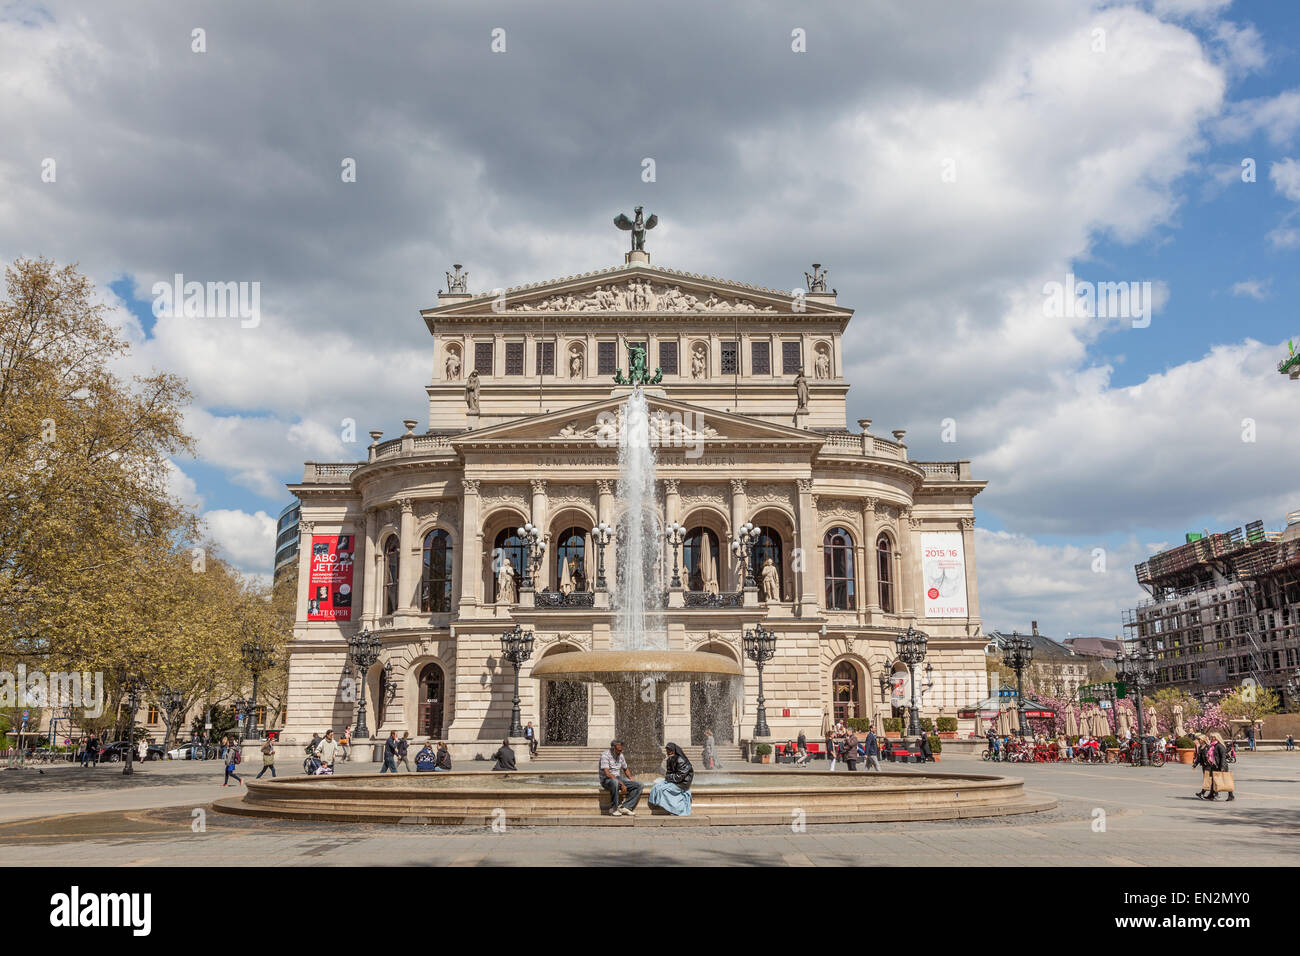 The Alte Oper (Old Opera) house and concert hall in Frankfurt Main, Germany Stock Photo